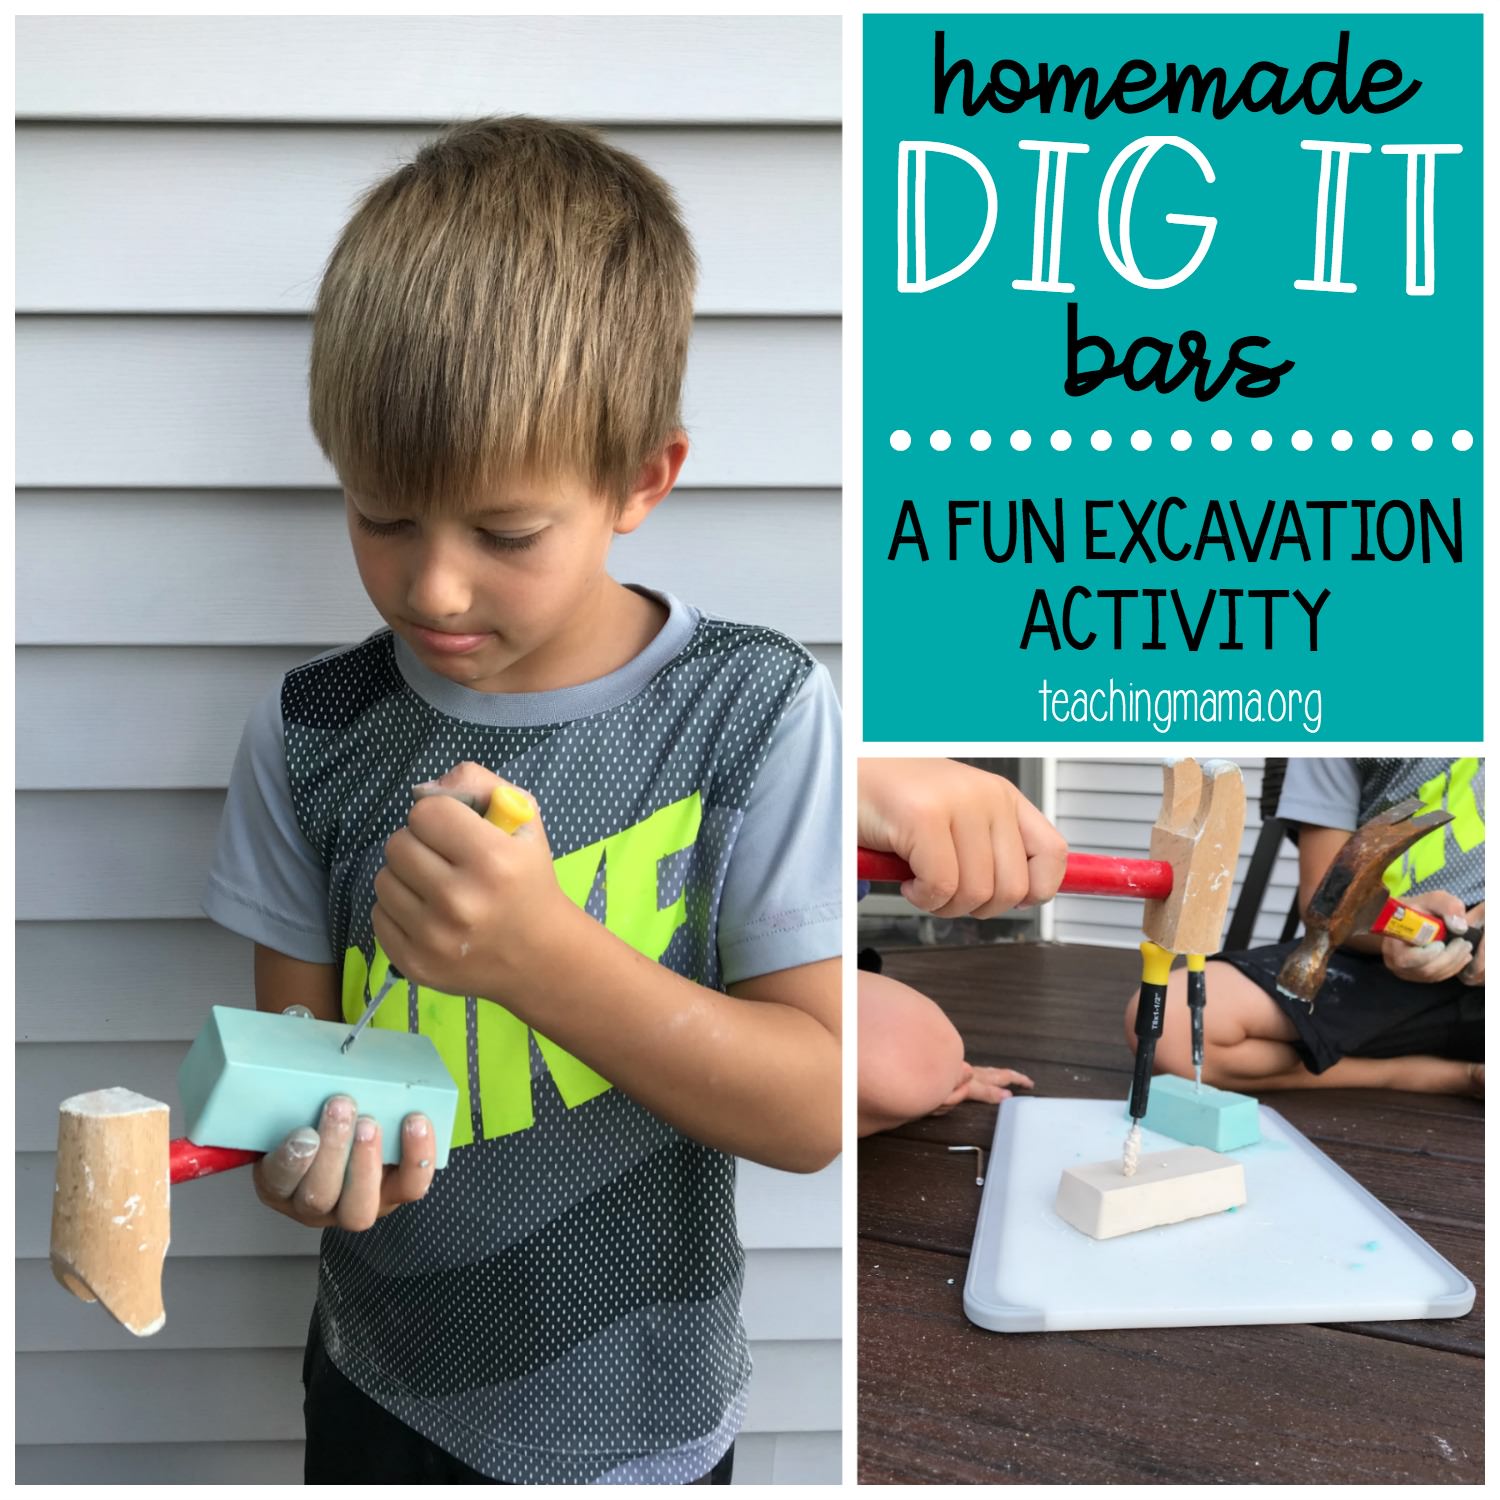 homemade dig it bars - excavation activity